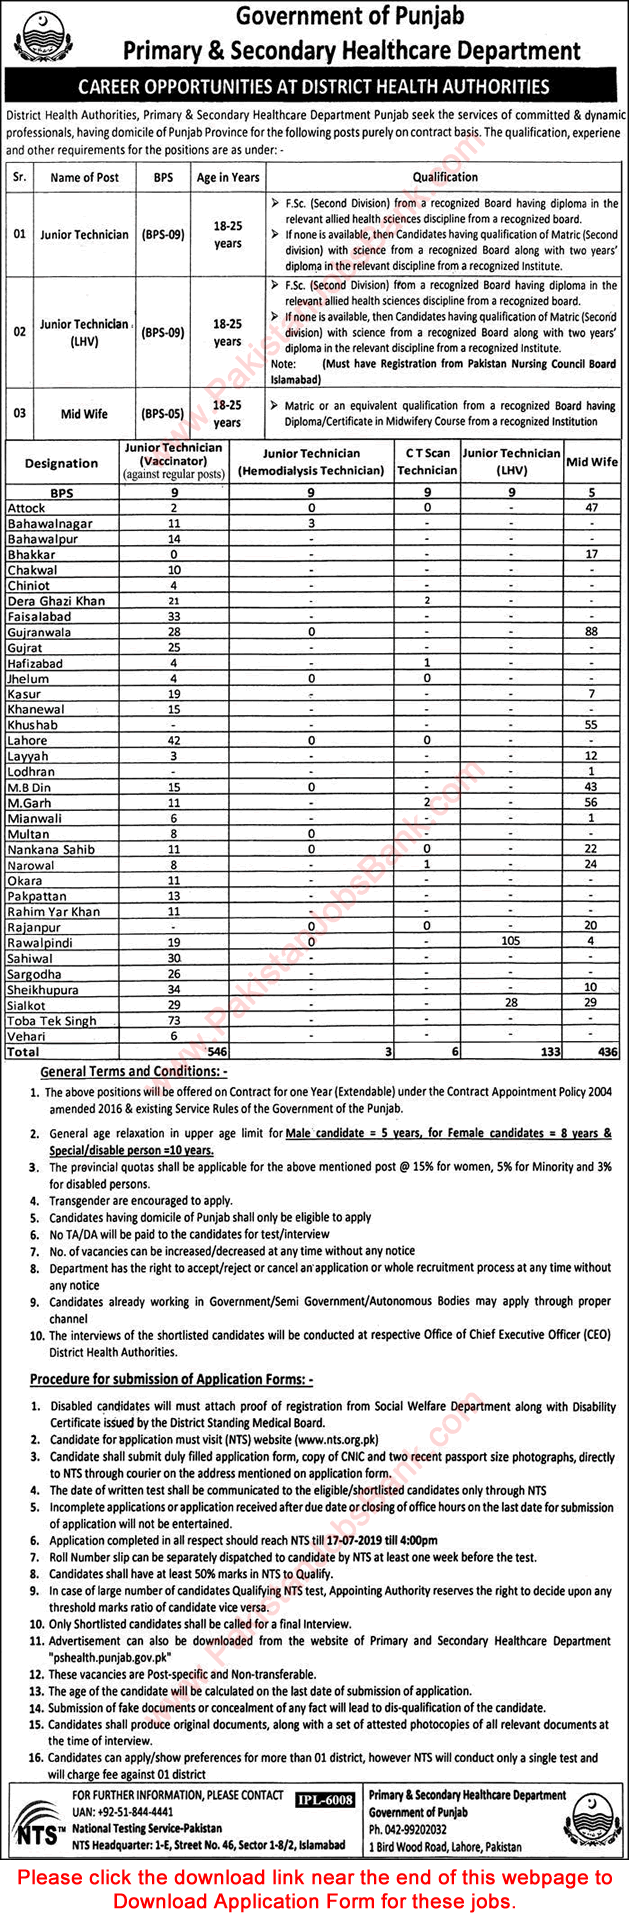 Primary and Secondary Healthcare Department Punjab Jobs July 2019 Vaccinators, LHV, Midwives & Others NTS Application Form Latest